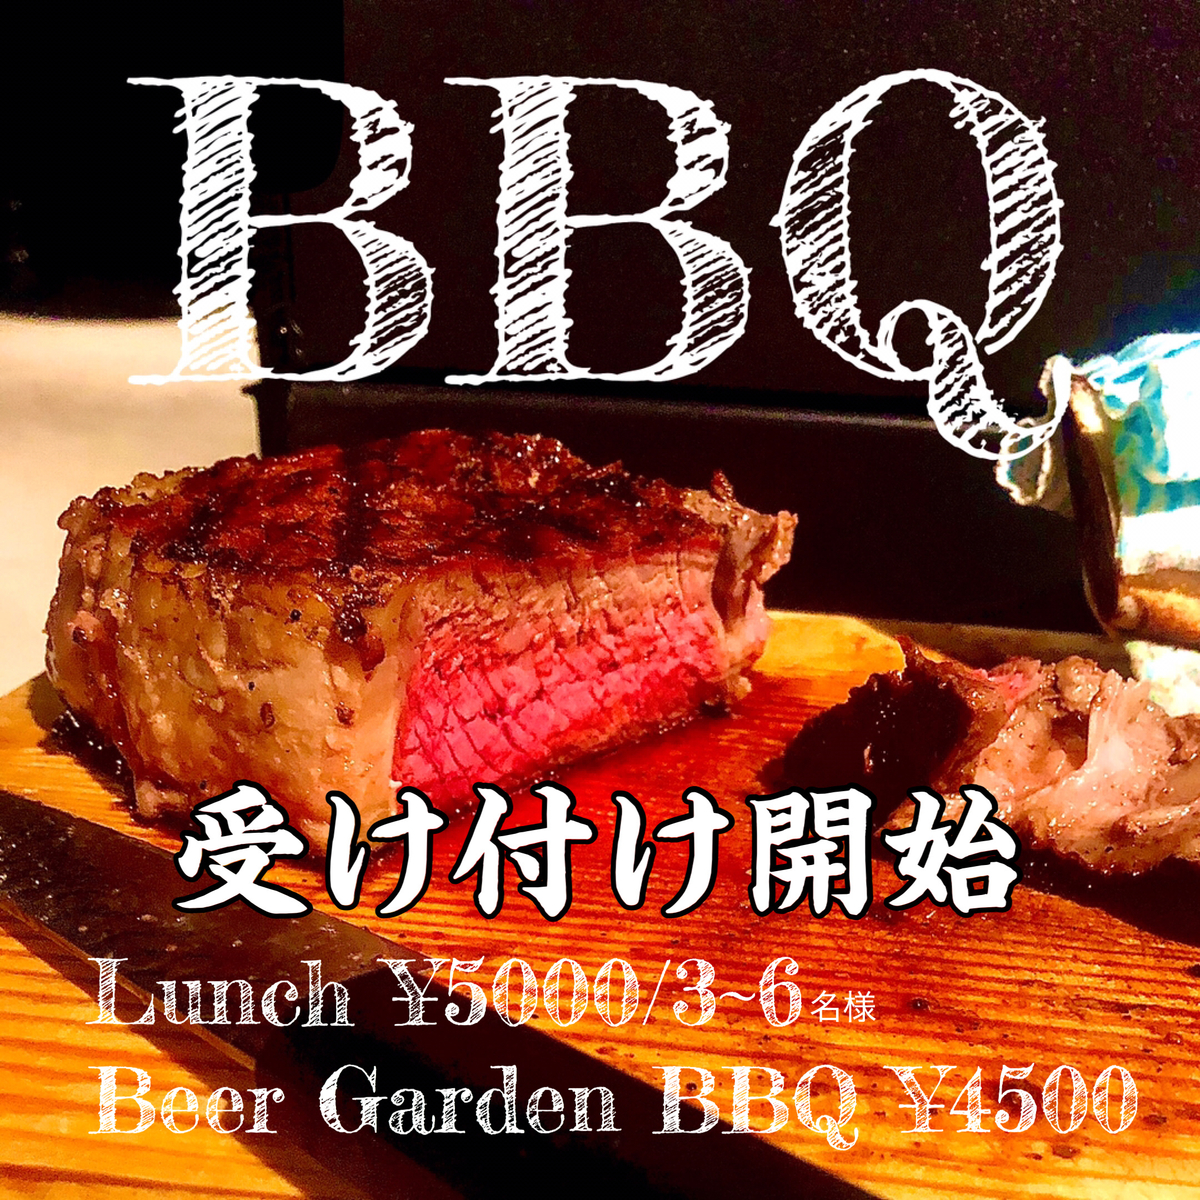 BBQ course information